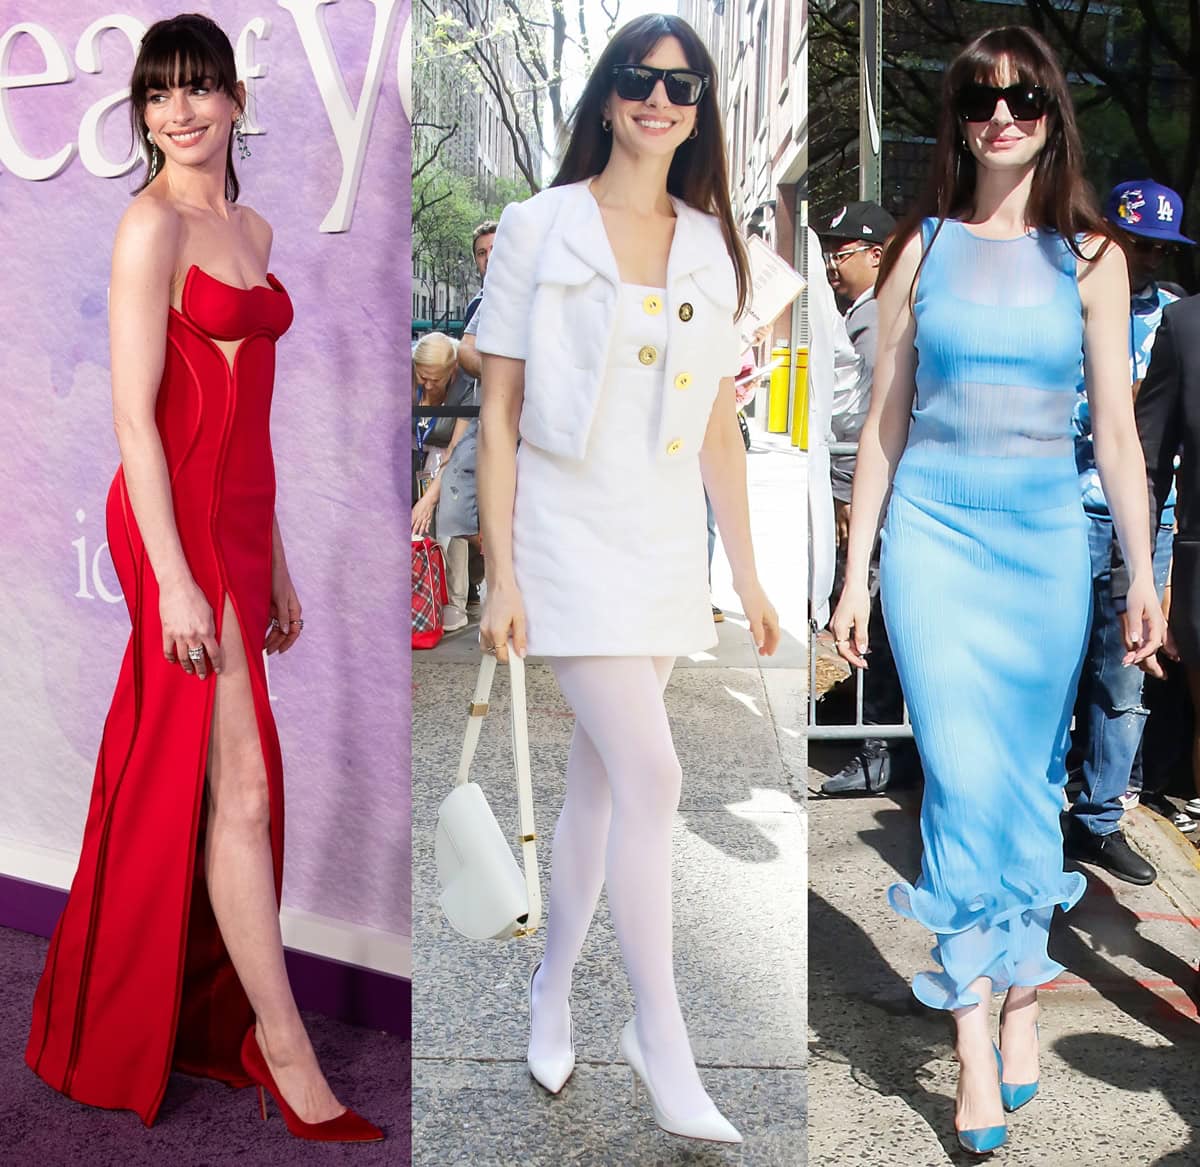 Anne Hathaway masters monochromatic styling with three distinctive looks: a vibrant red gown for a premiere event, a crisp all-white ensemble for a morning TV show, and a serene blue dress for a casual daytime appearance